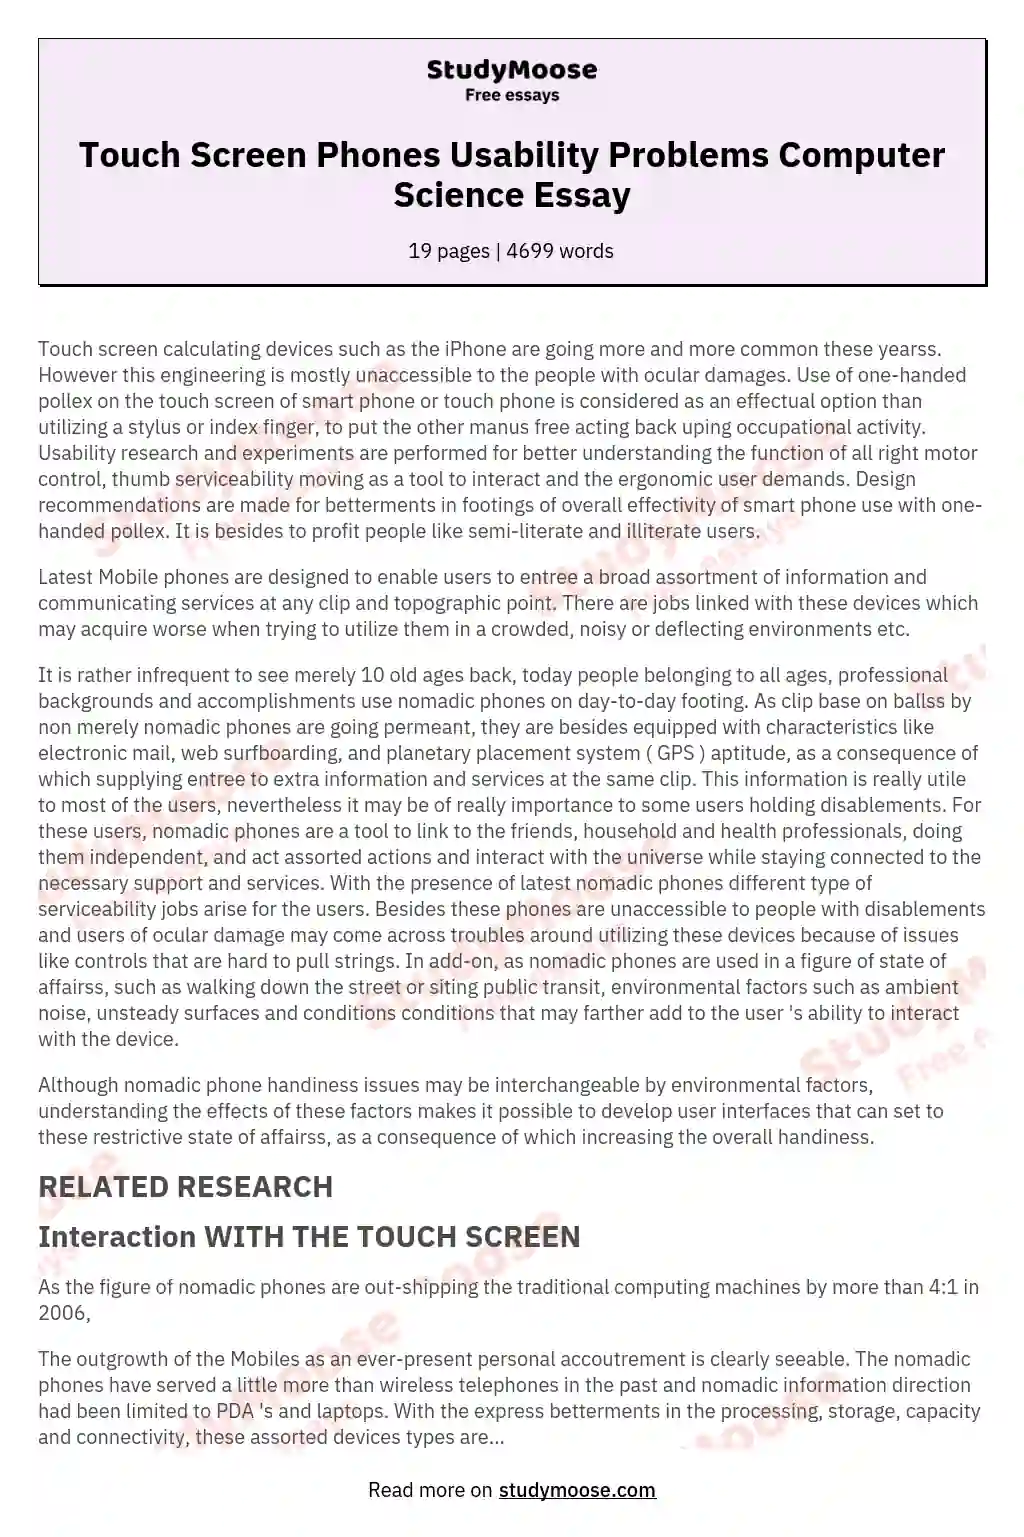 Touch Screen Phones Usability Problems Computer Science Essay